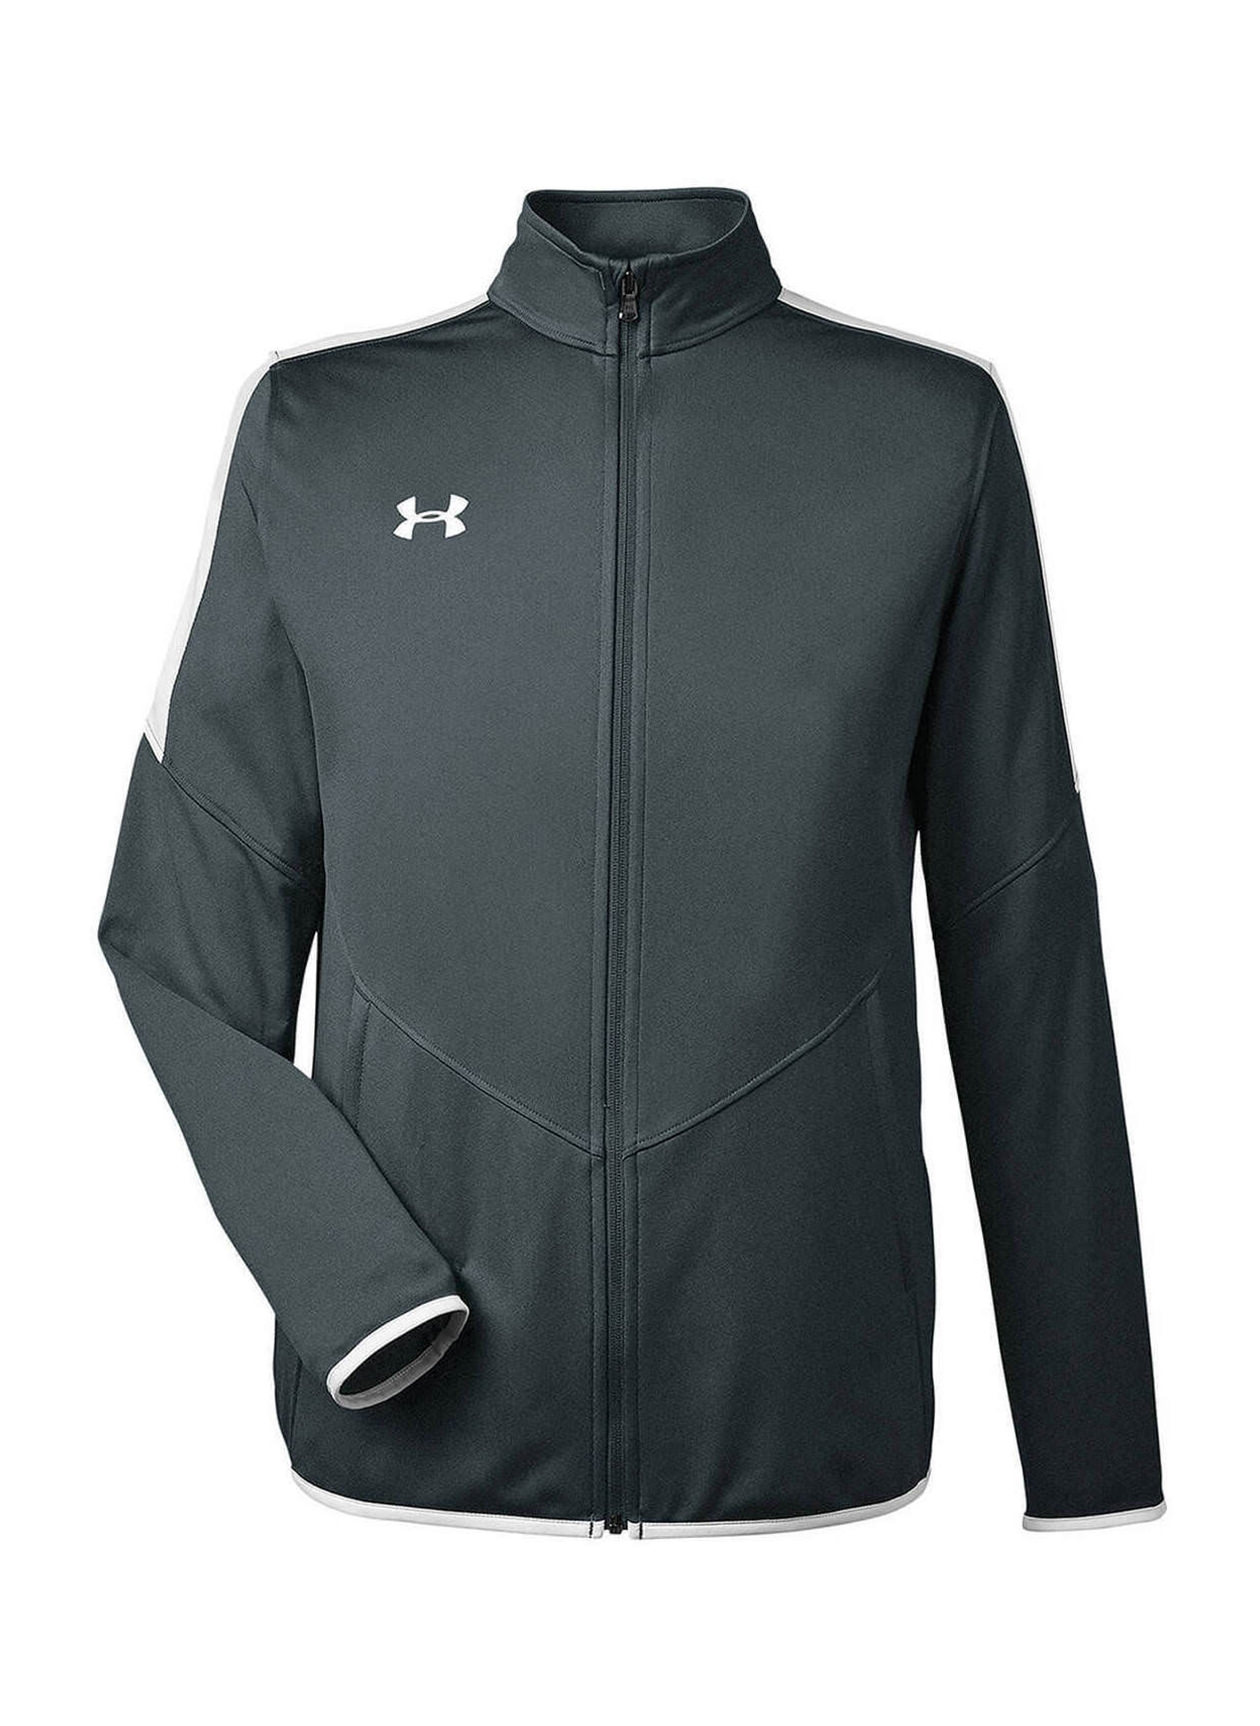 Under Armour Men's Stealth Rival Knit Jacket